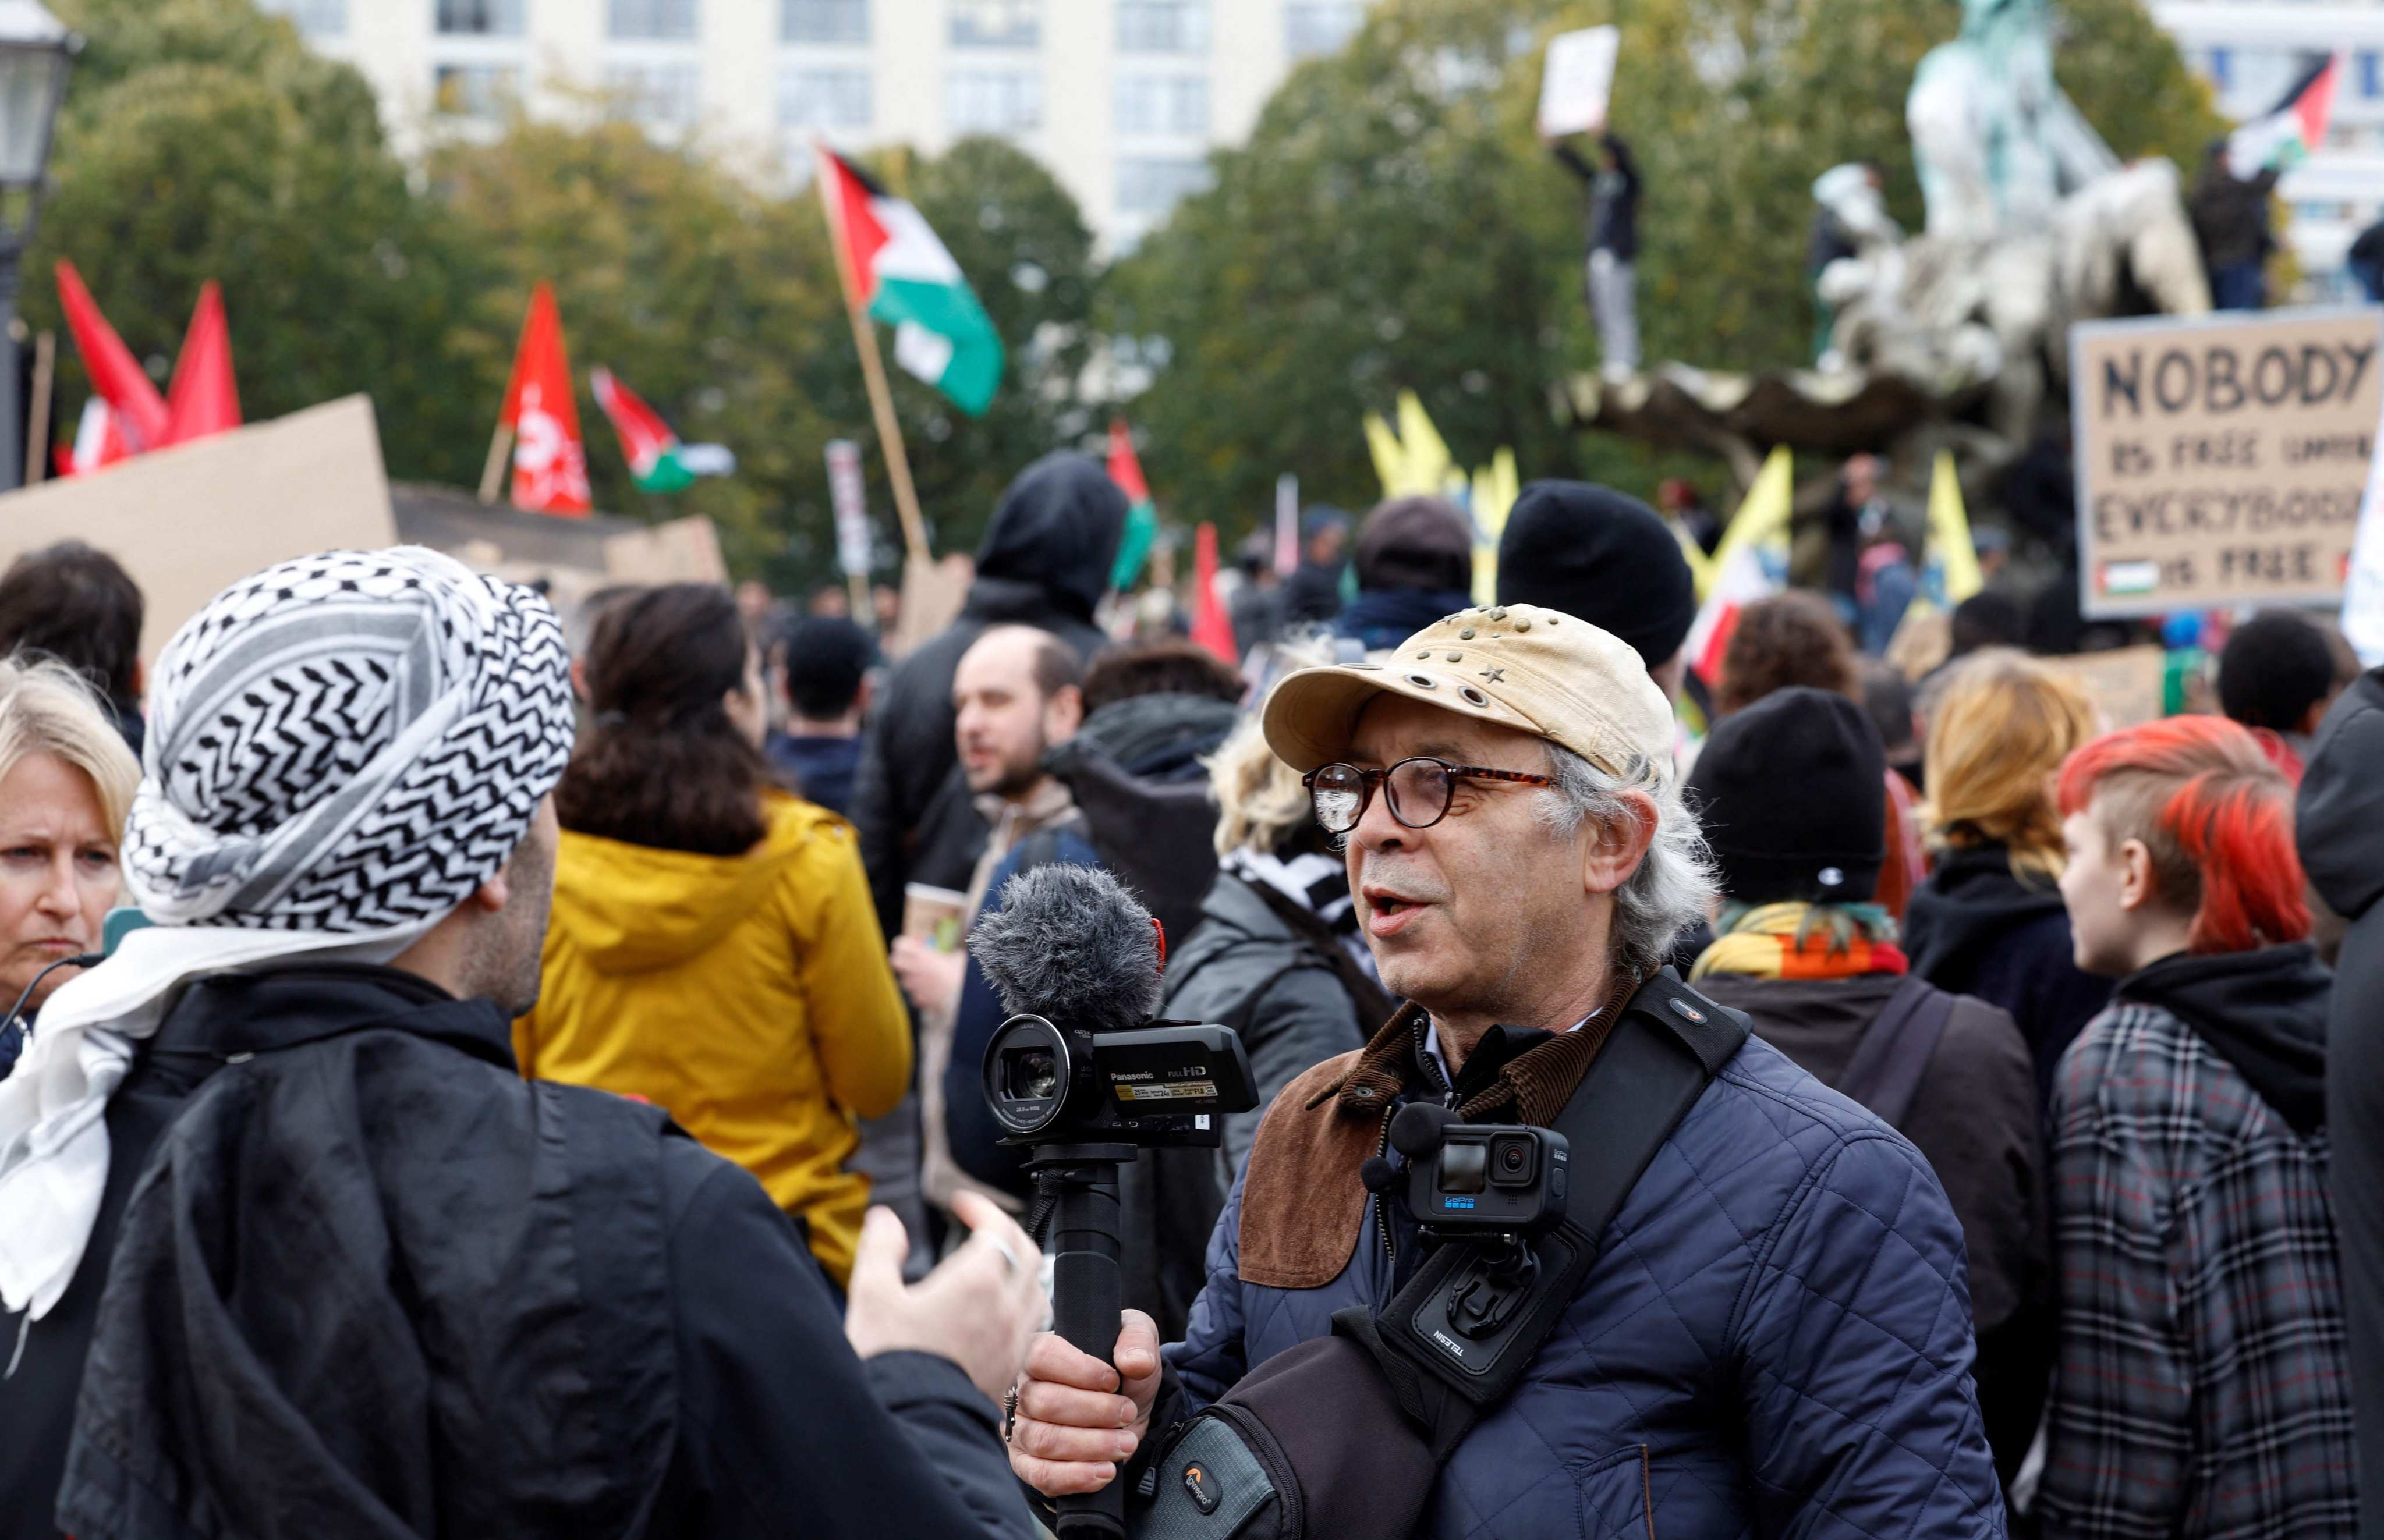 Levi Salomon (R) films during a protest in support of Palestinians under the slogan ‘Free Palestine’ in Berlin, Germany. Photo: AFP